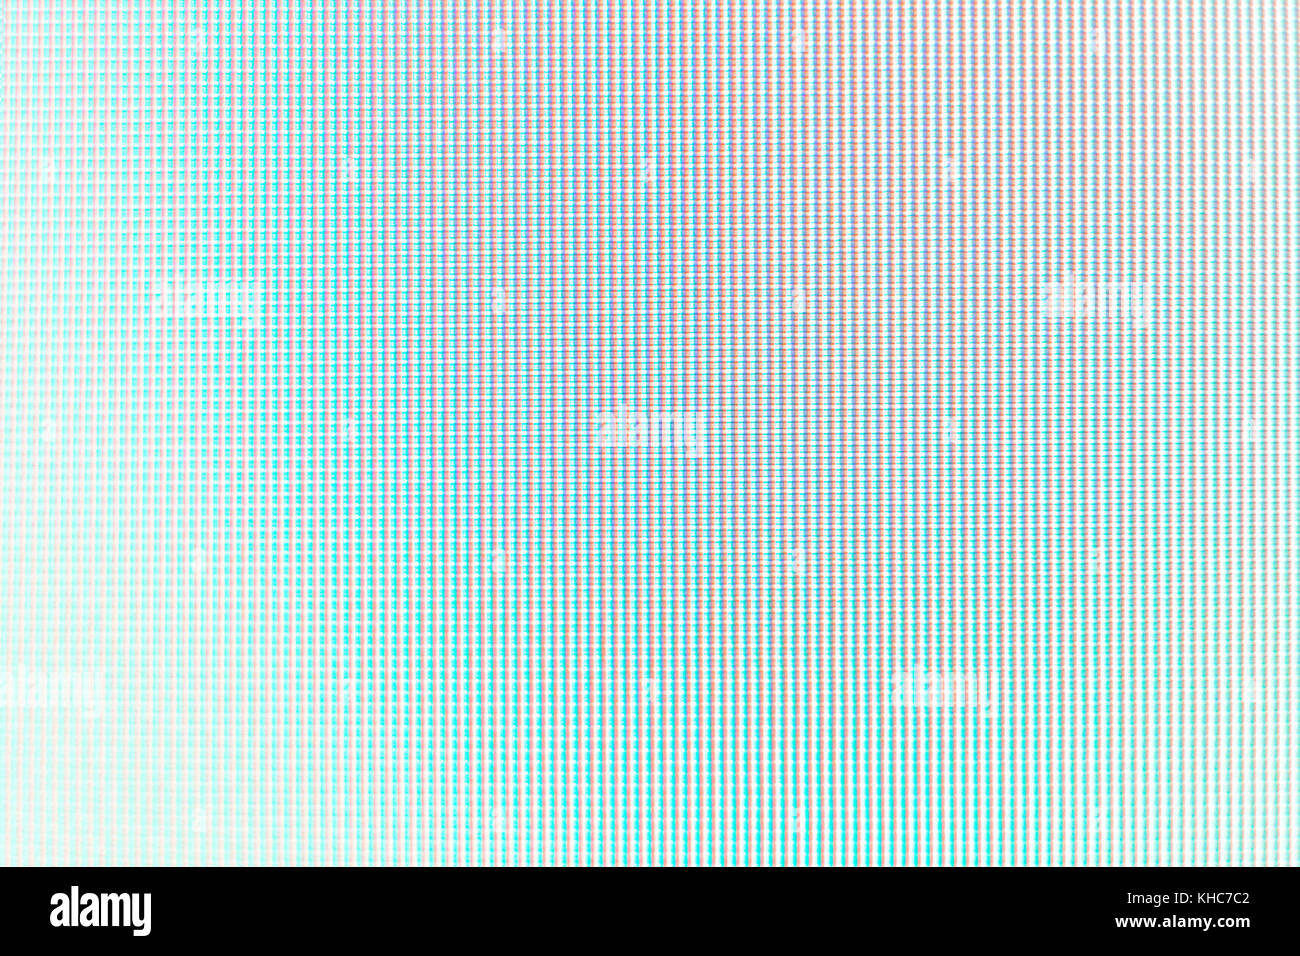 abstract monitor led screen texture background Stock Photo